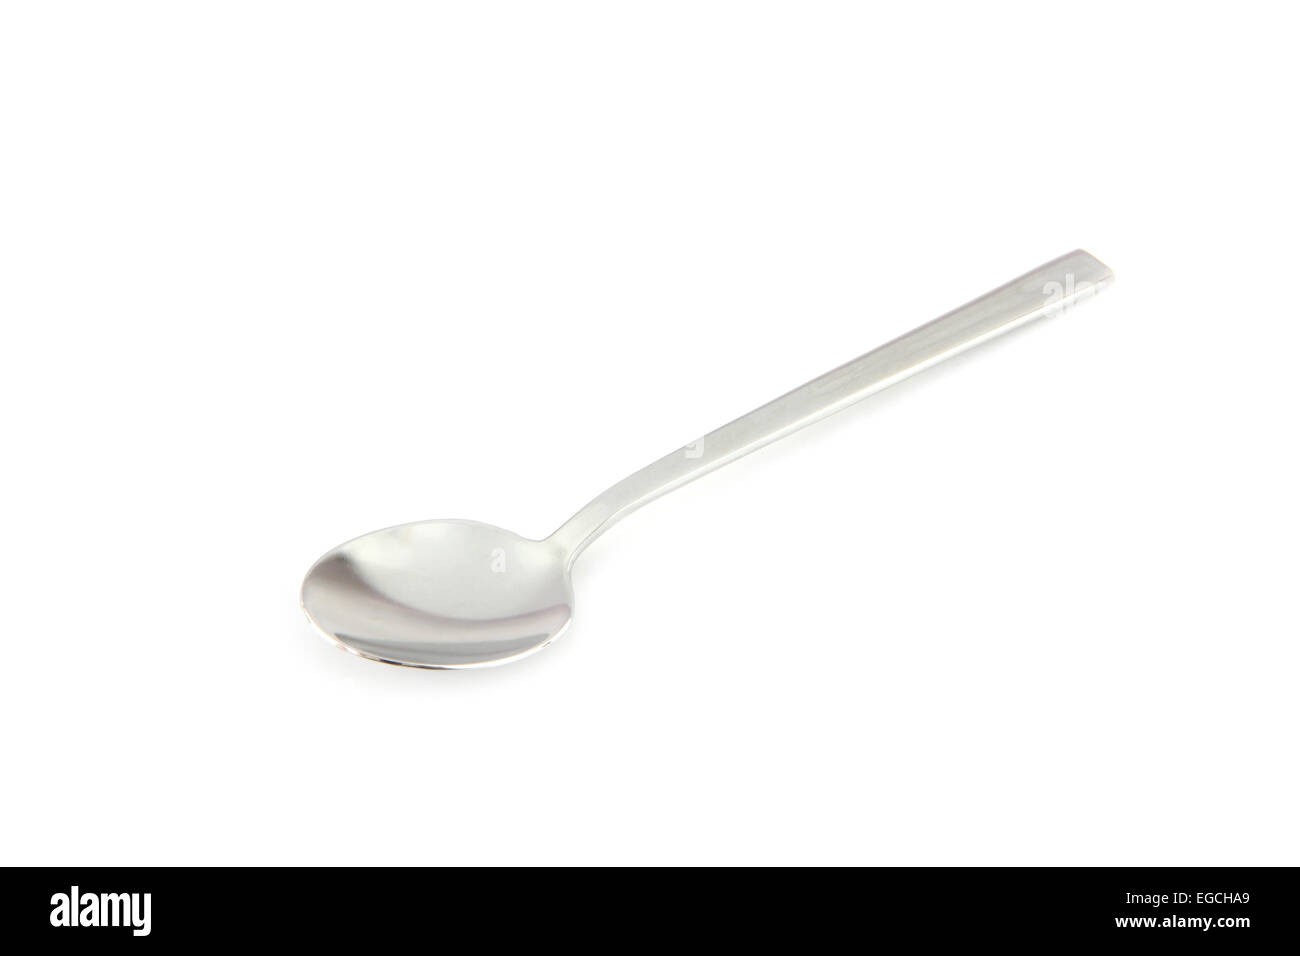 Stainless steel spoon on white background. Stock Photo